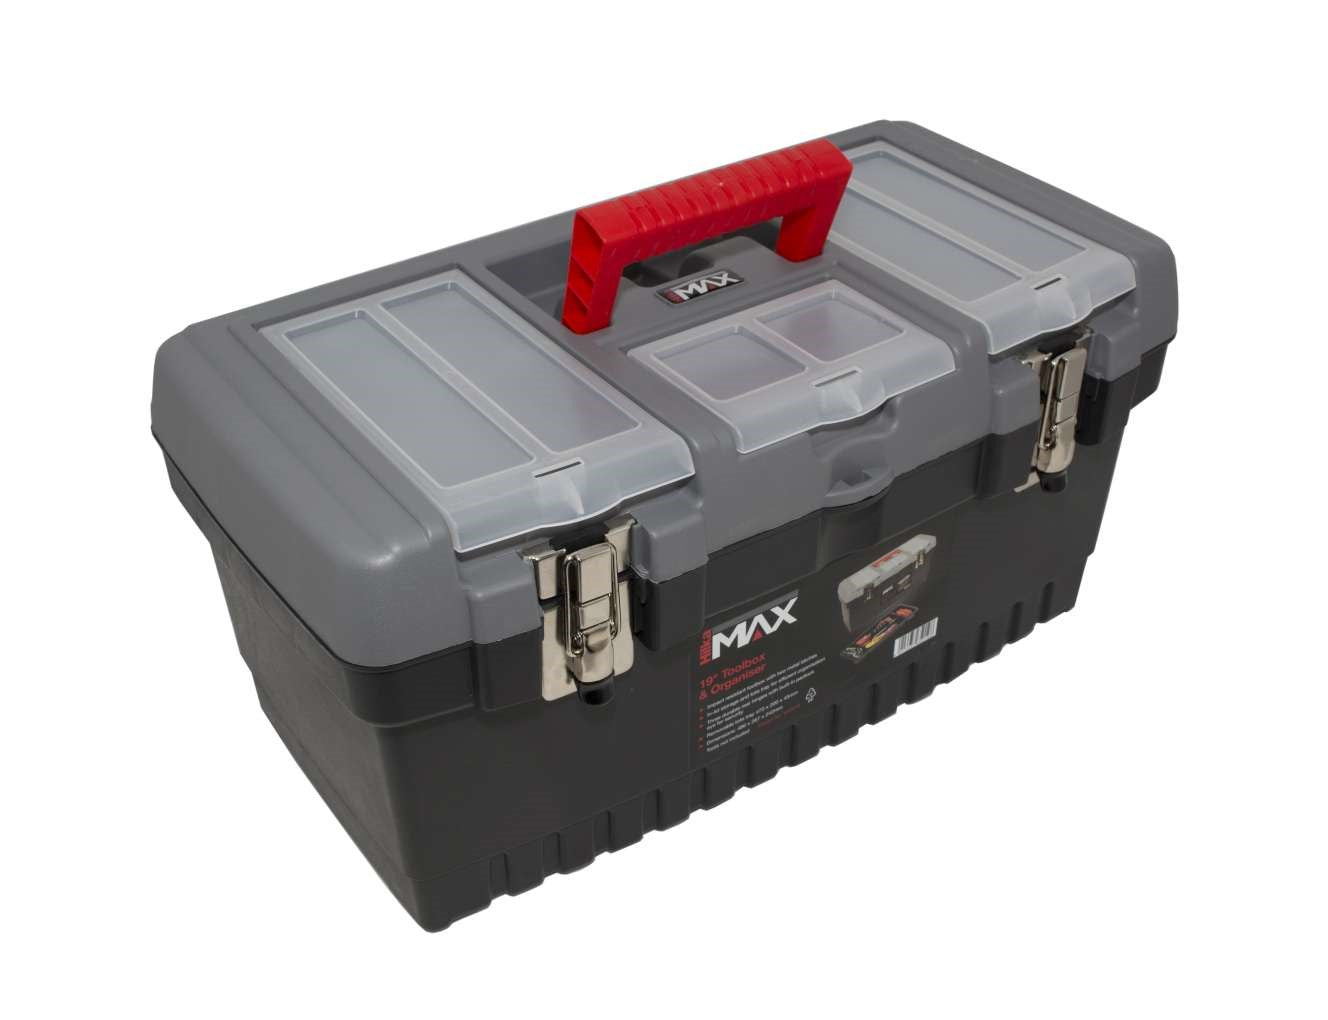 Buy Cheap Tool Box - Heavy Duty, Garage, Workshop - Free Delivery UK